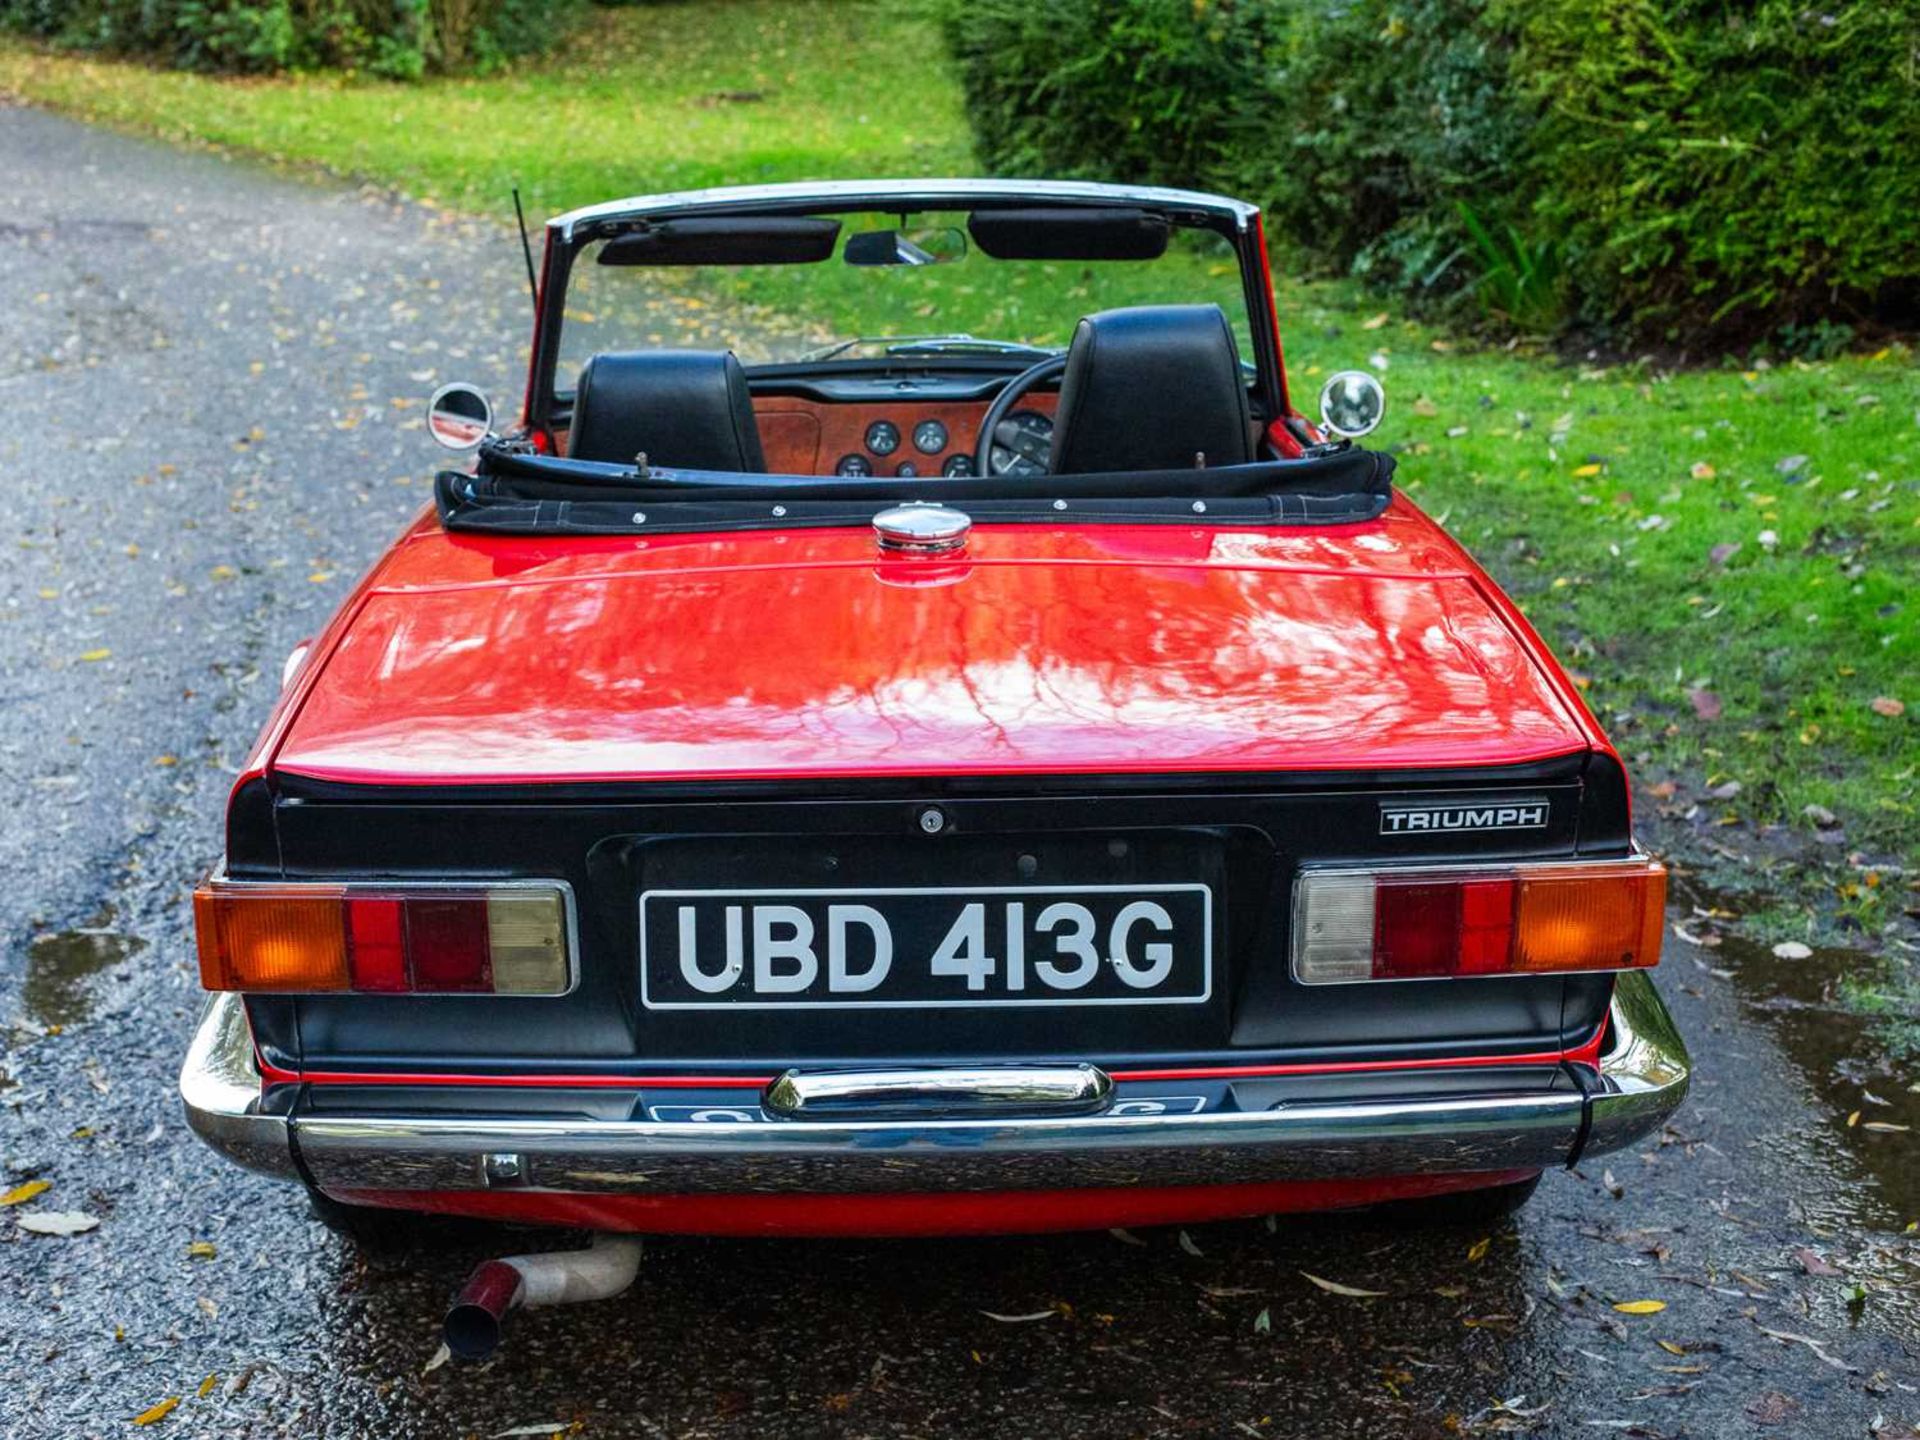 1969 Triumph TR6 Repatriated in 2020, converted to RHD and equipped with UK-specification SU carbure - Image 9 of 53